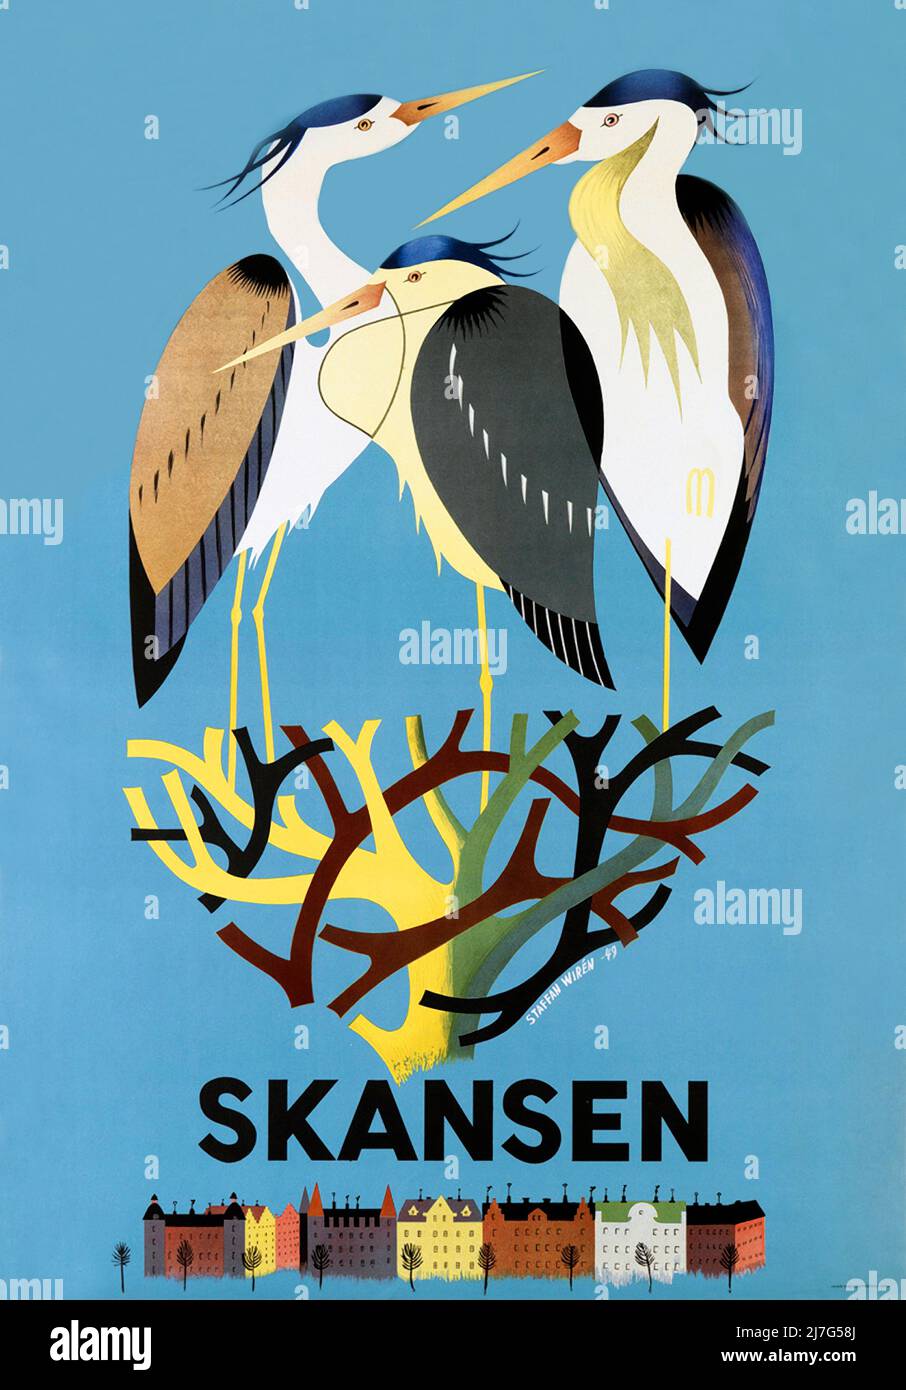 Vintage 1930s Travel Poster - Skansen - The Oldest open-air museum and zoo in Sweden located on the island Djurgården in Stockholm, Sweden. Stock Photo